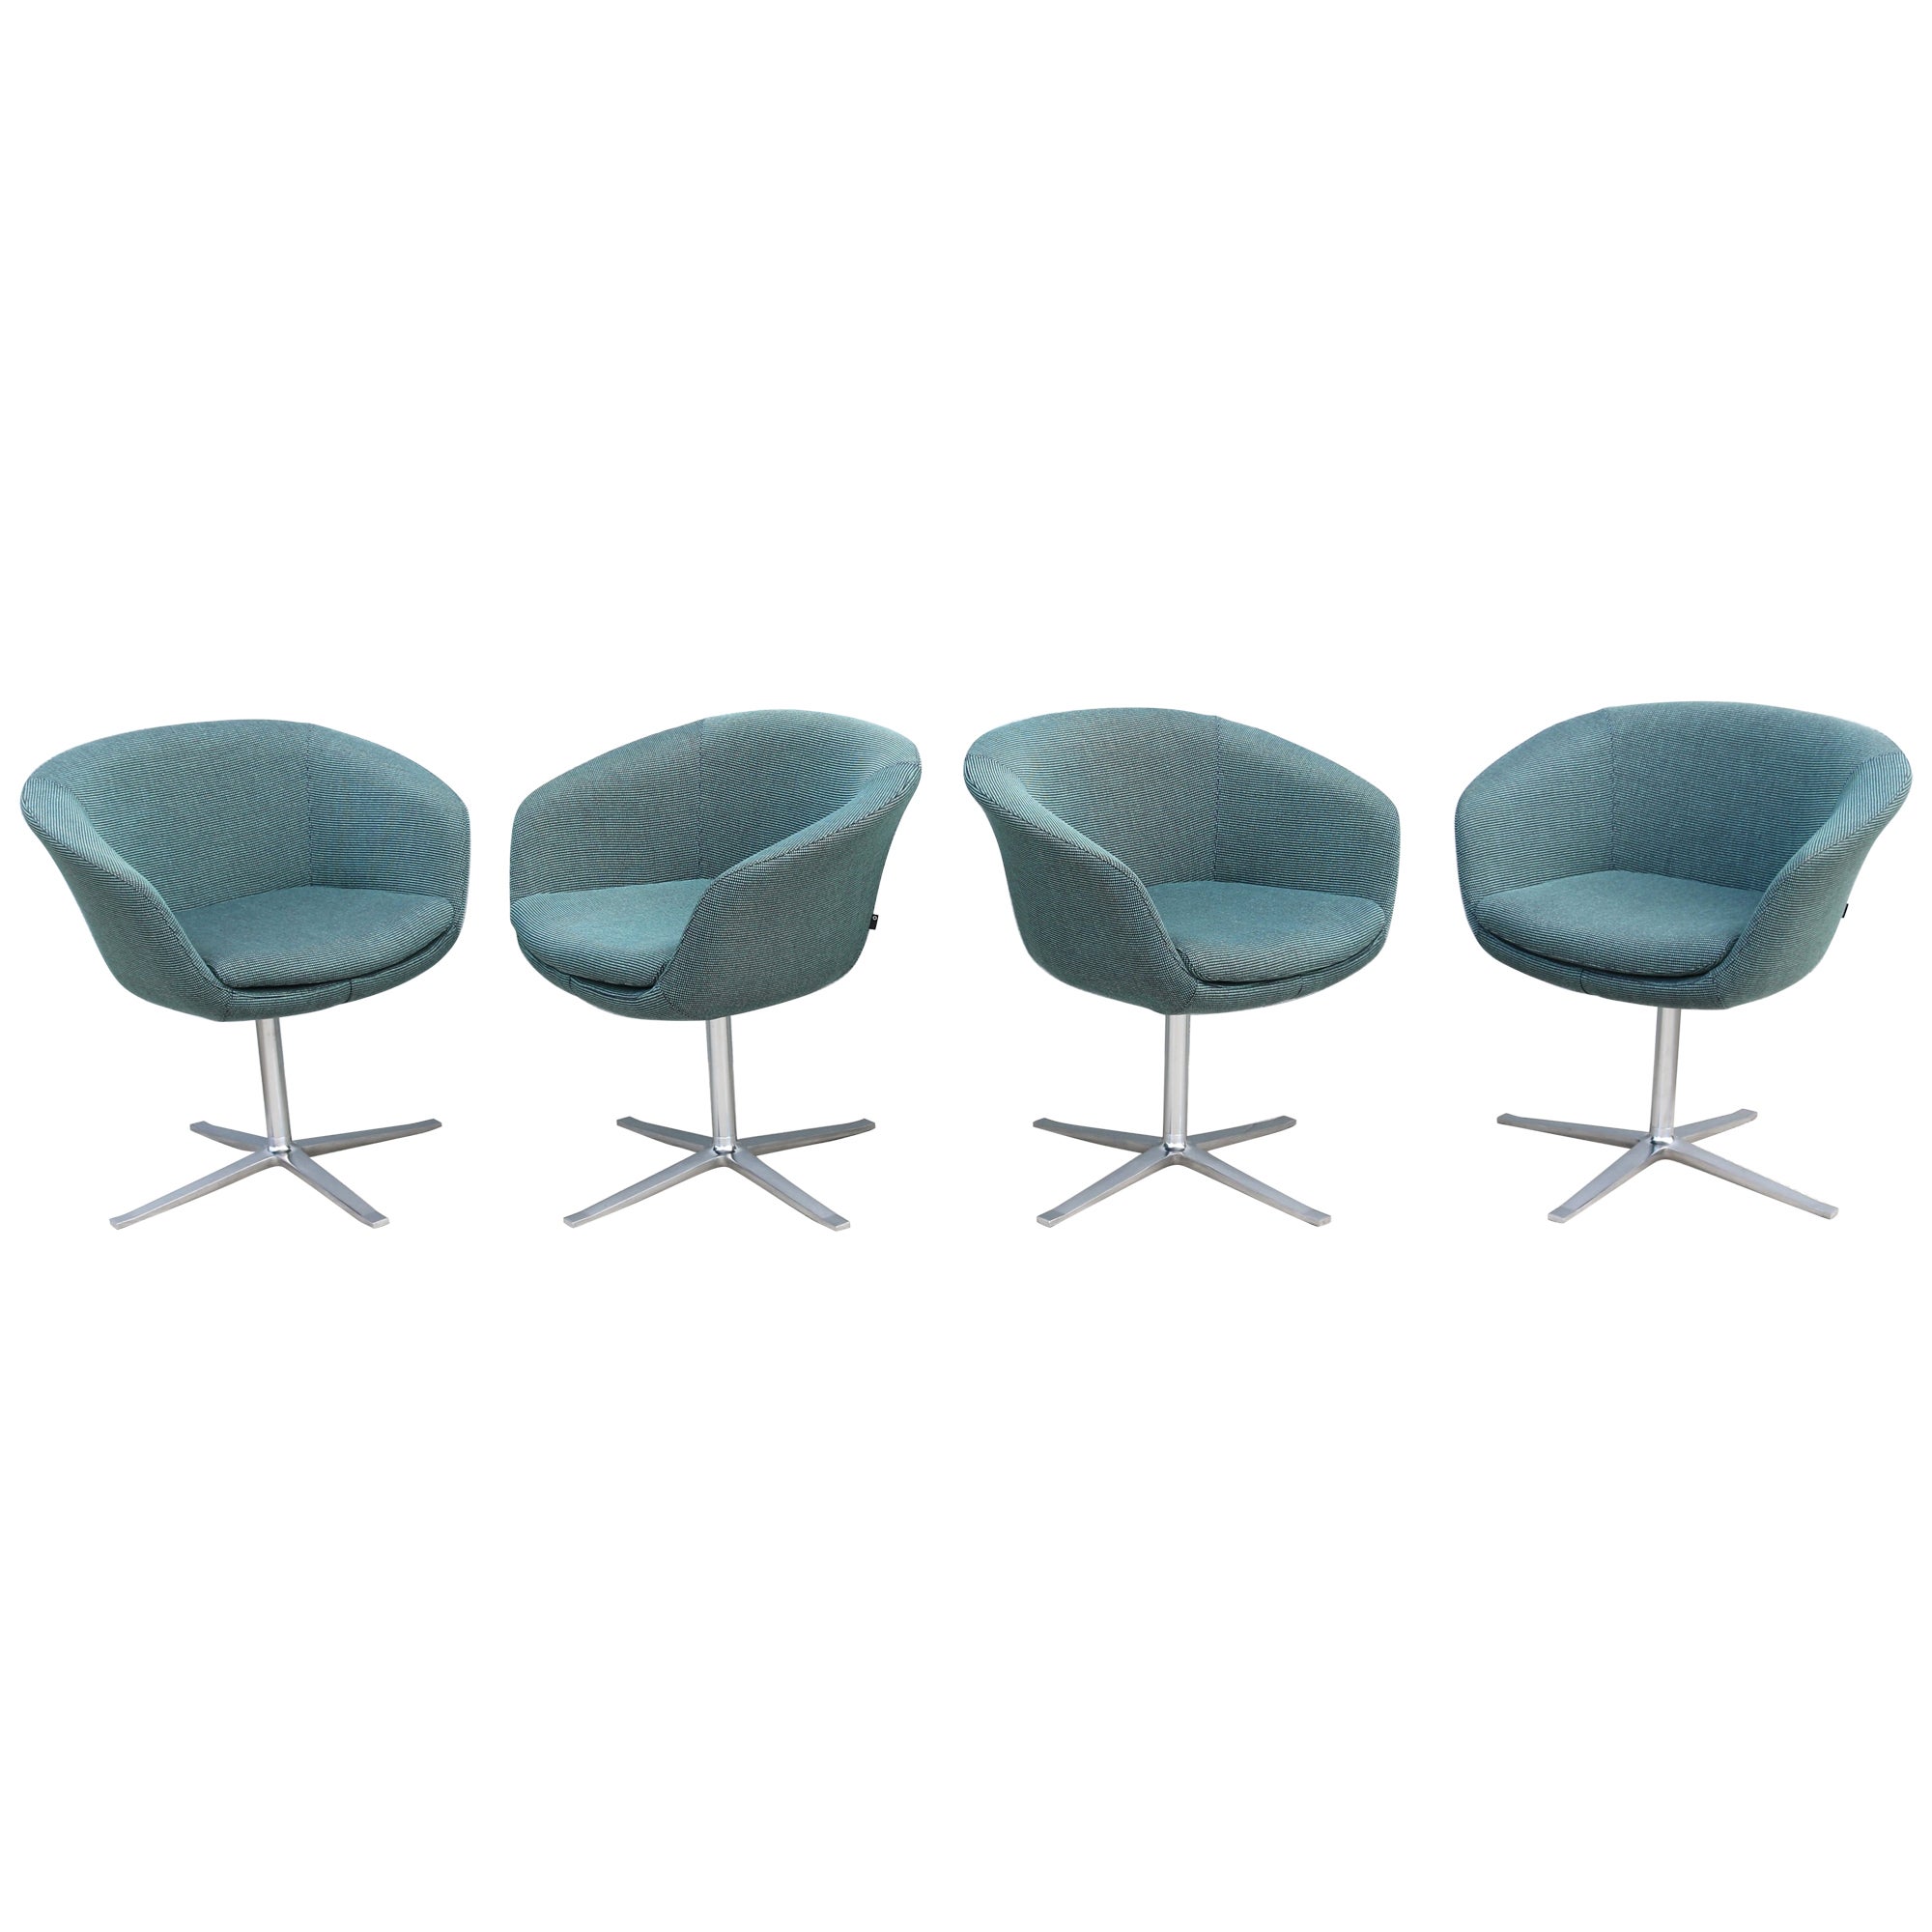 Modern Pearson Lloyd for Coalesse Bob Swivel Chairs by Walter Knoll - Set of 4